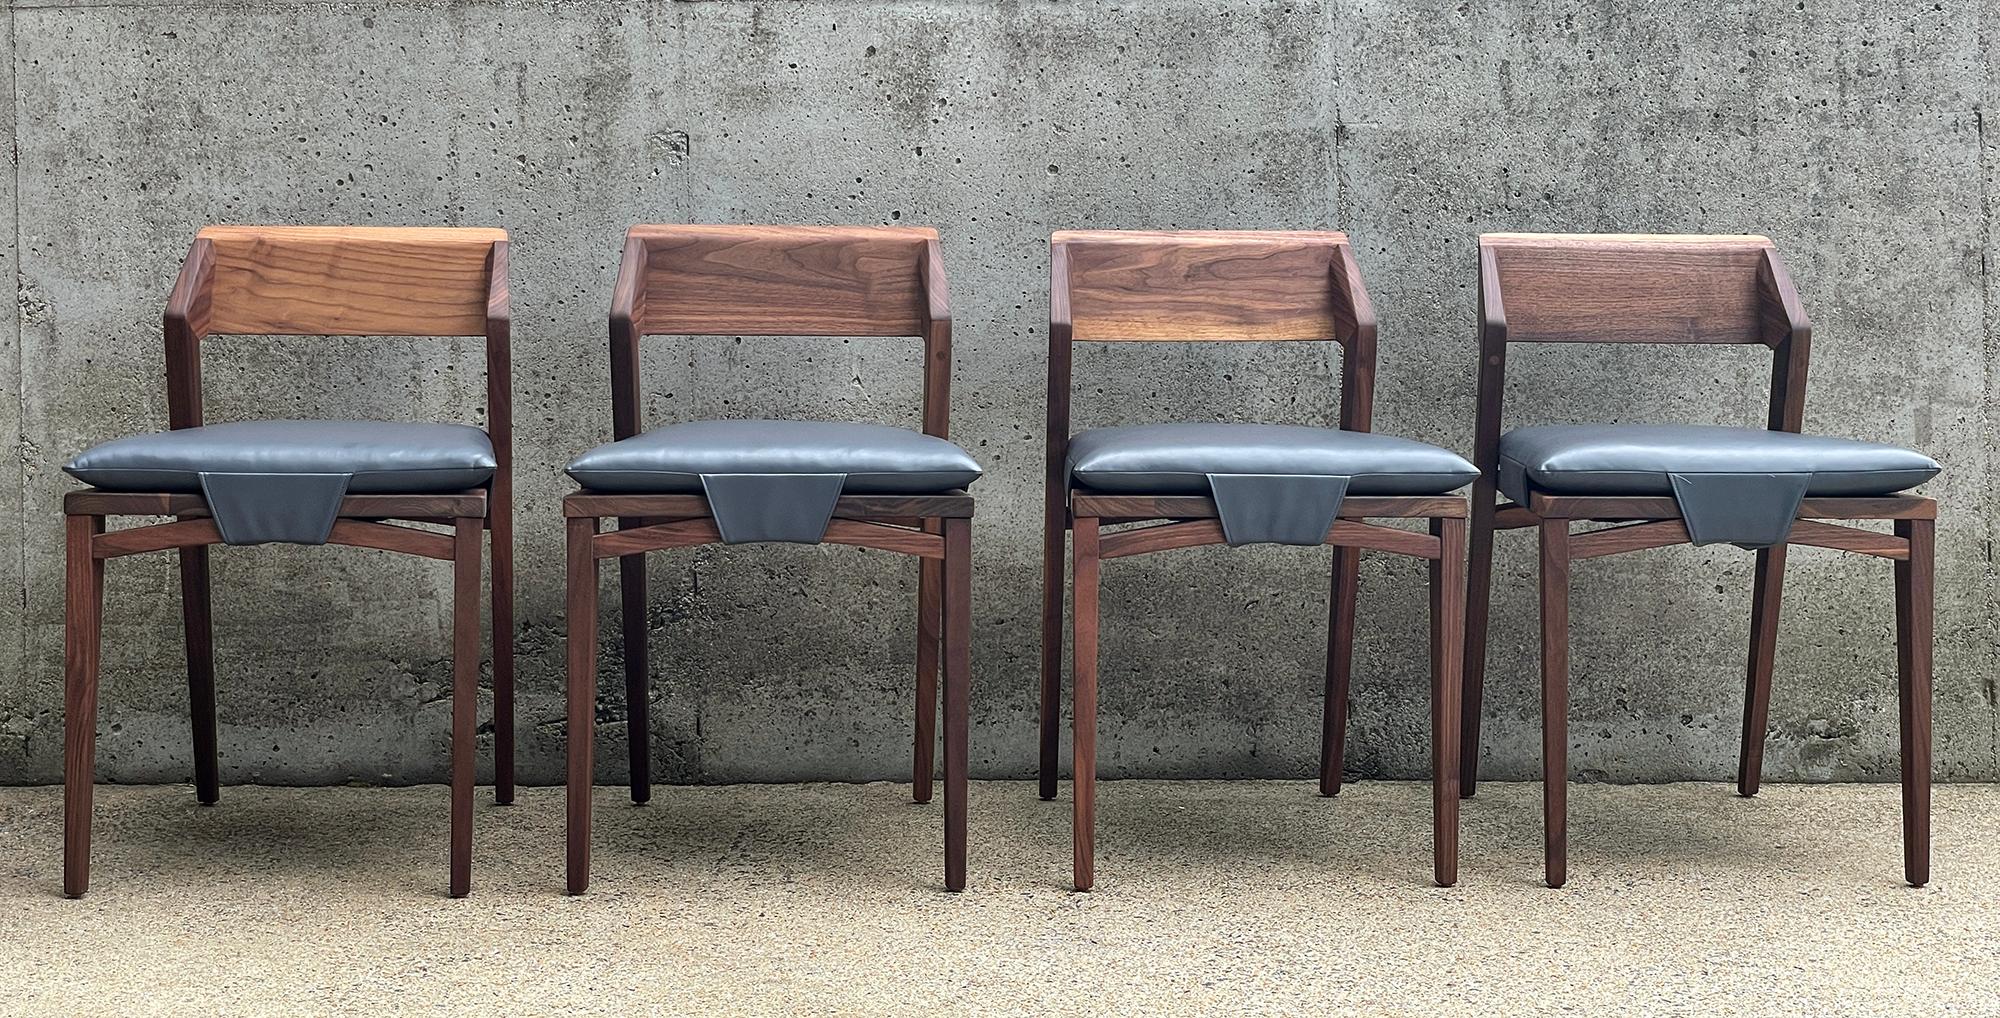 American 6 Modern Dining Chairs, Osteria Side Chair, Leather Cushion by MarCo Bogazzi For Sale